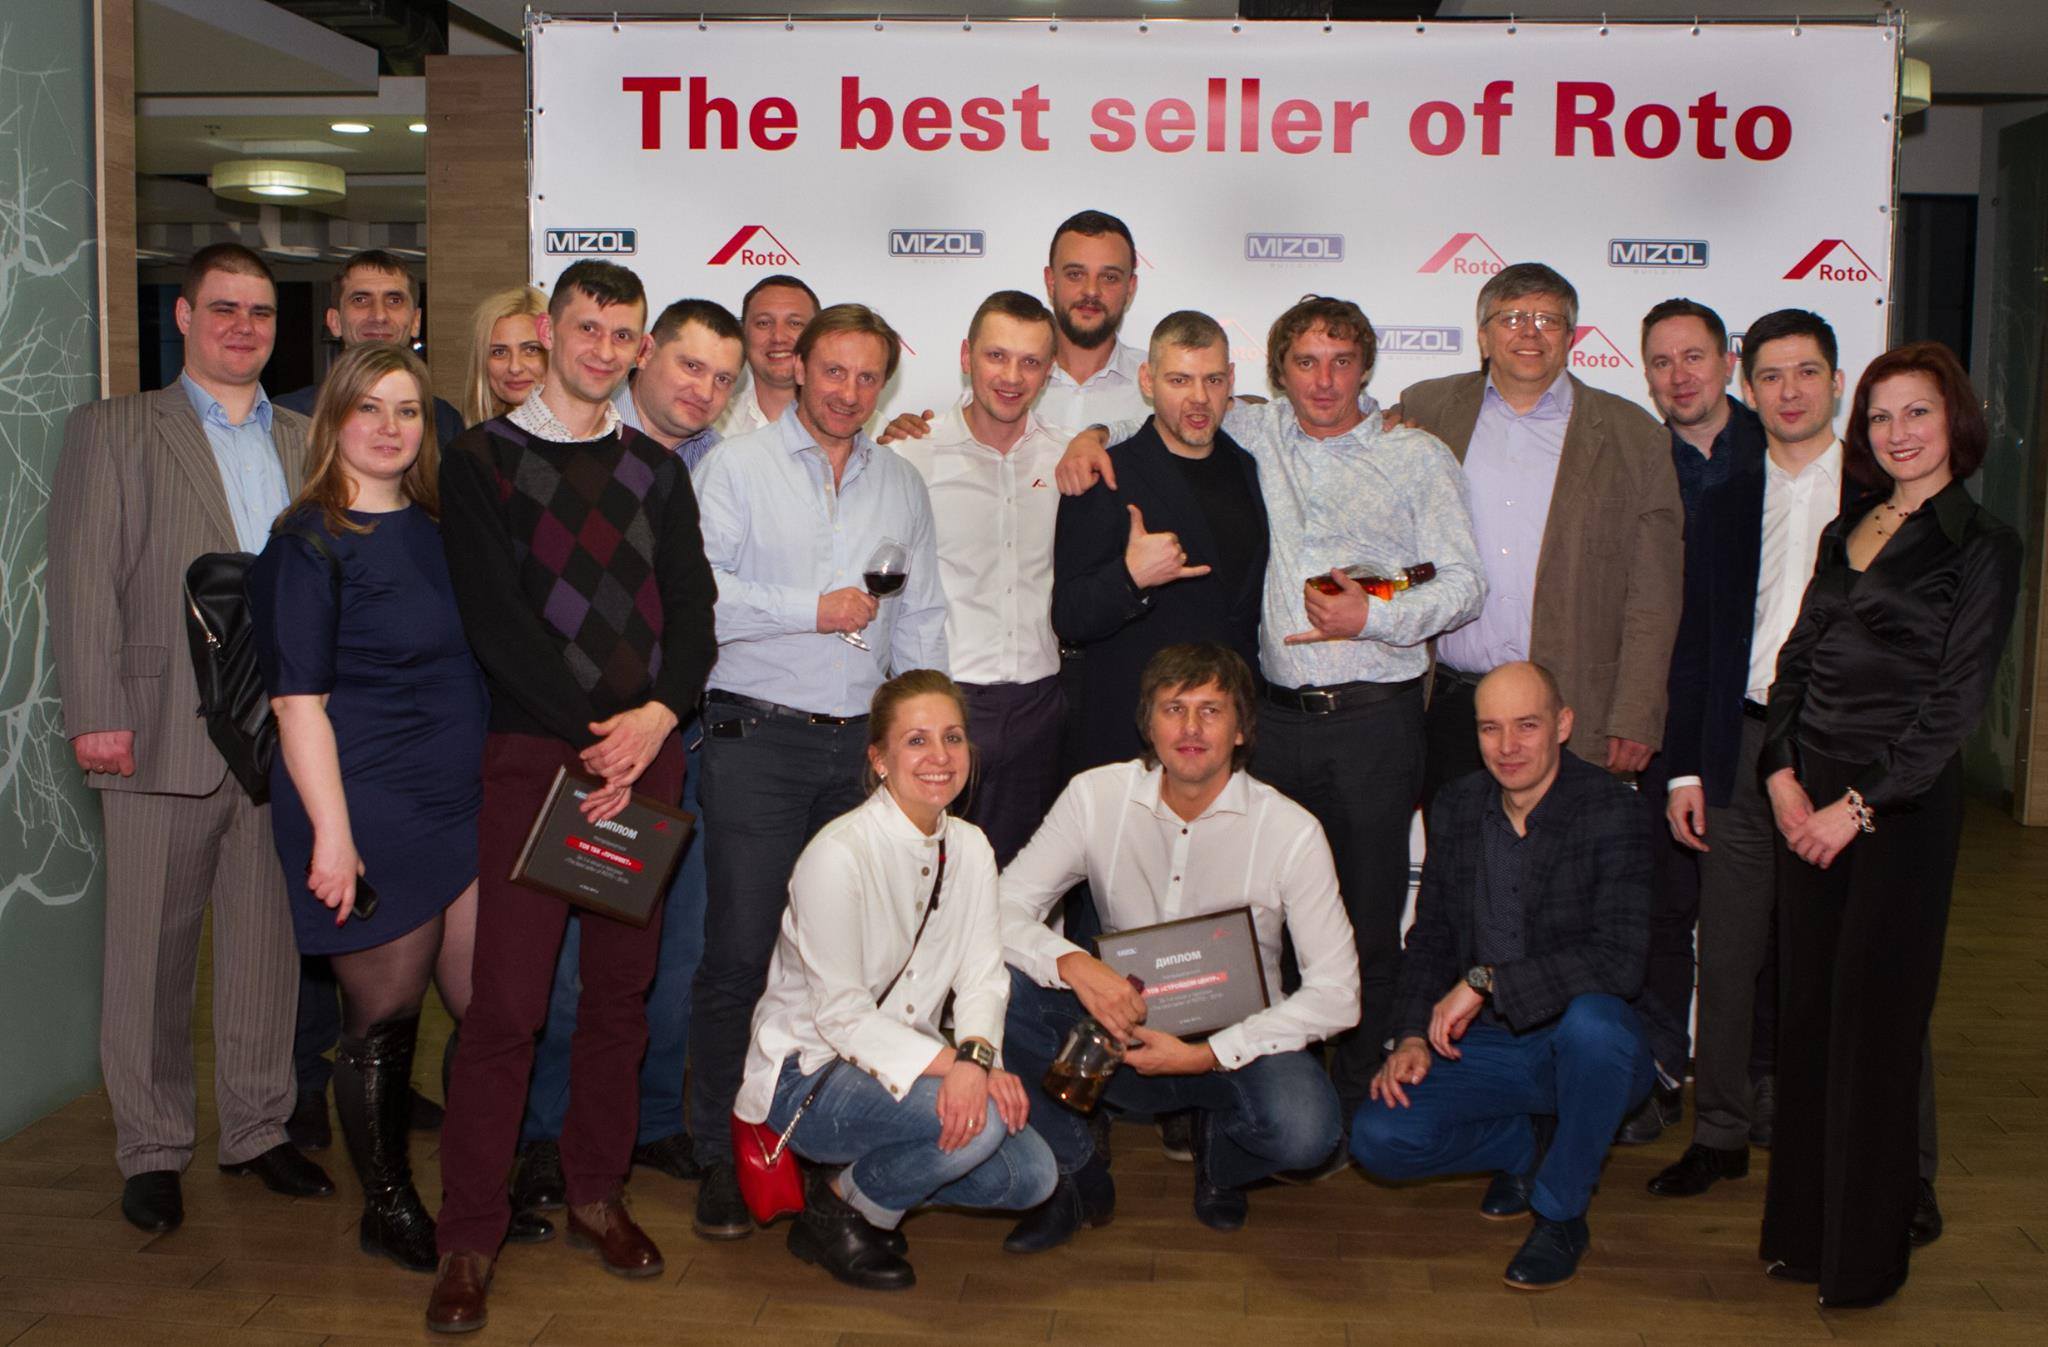 We are the Champions! The best seller of Roto 2016